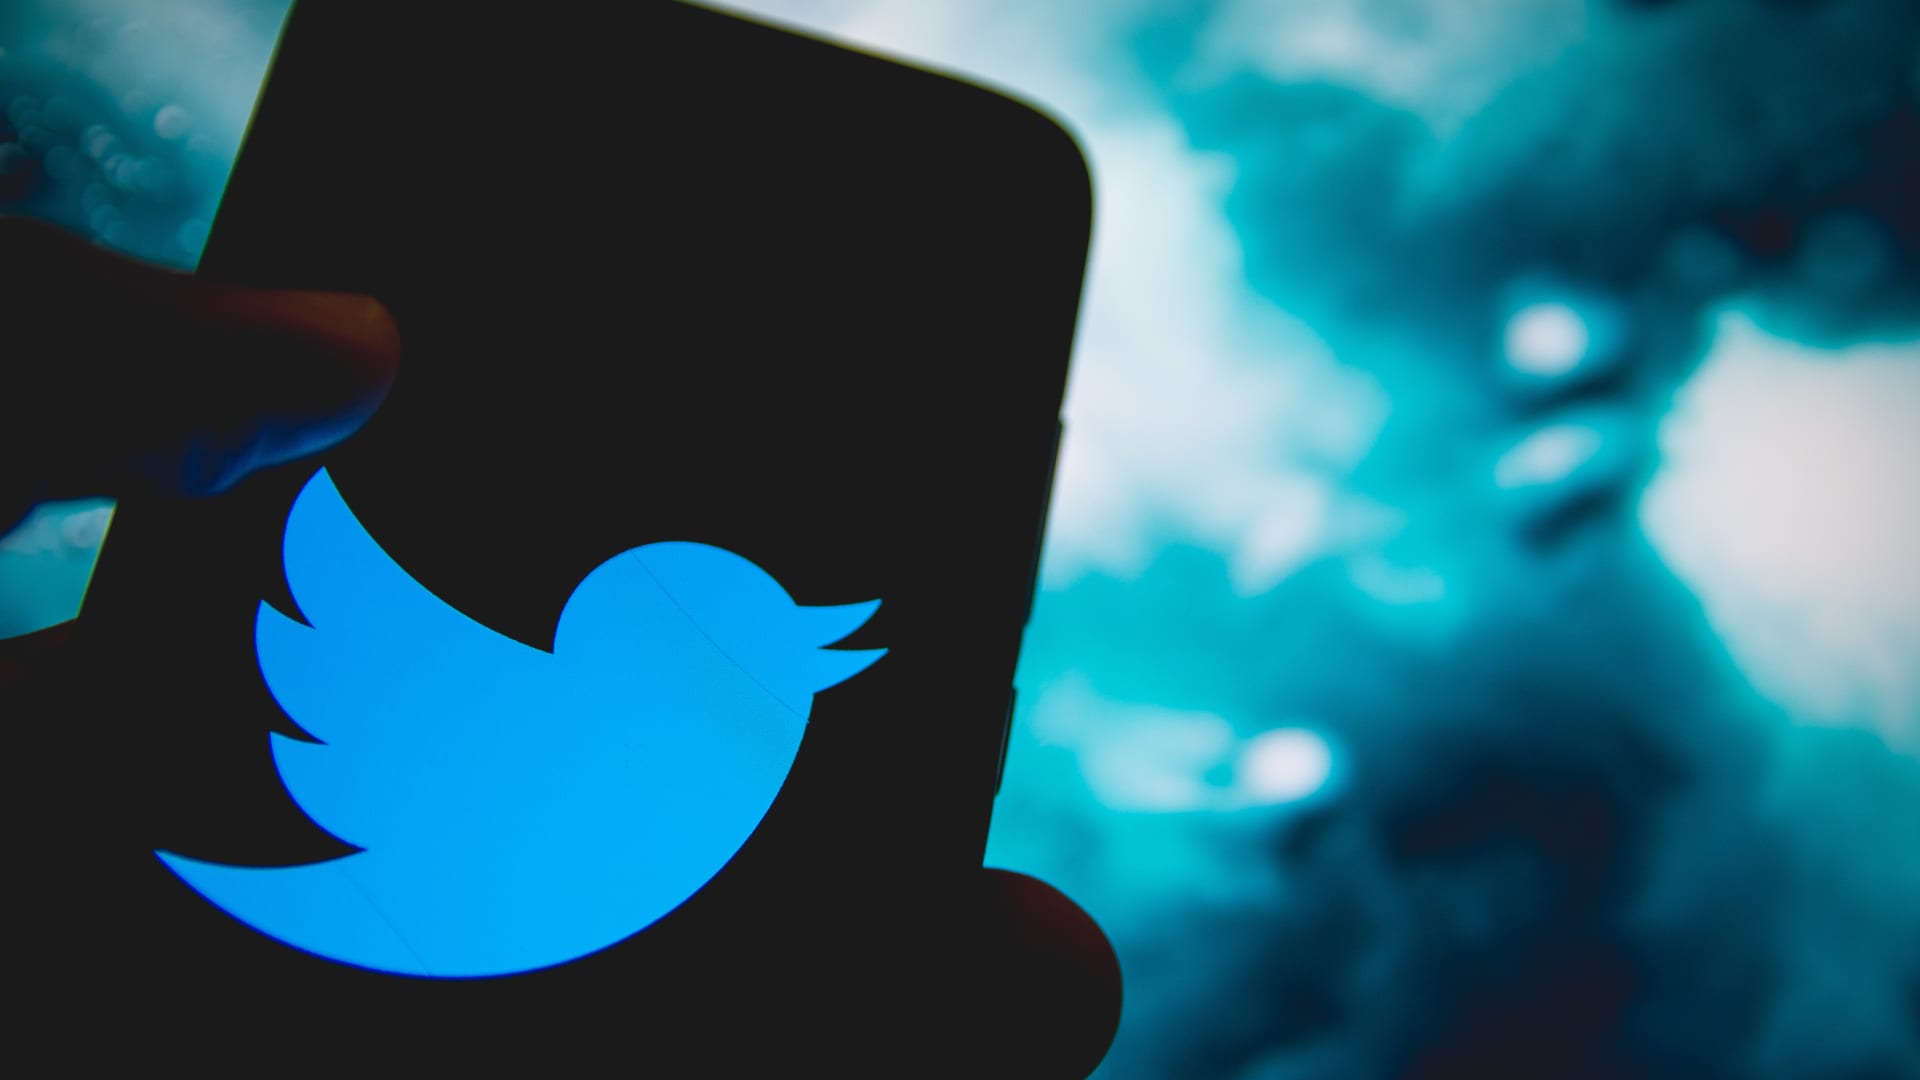 The Twitter logo is displayed on a smartphone screen on April 14, 2021.